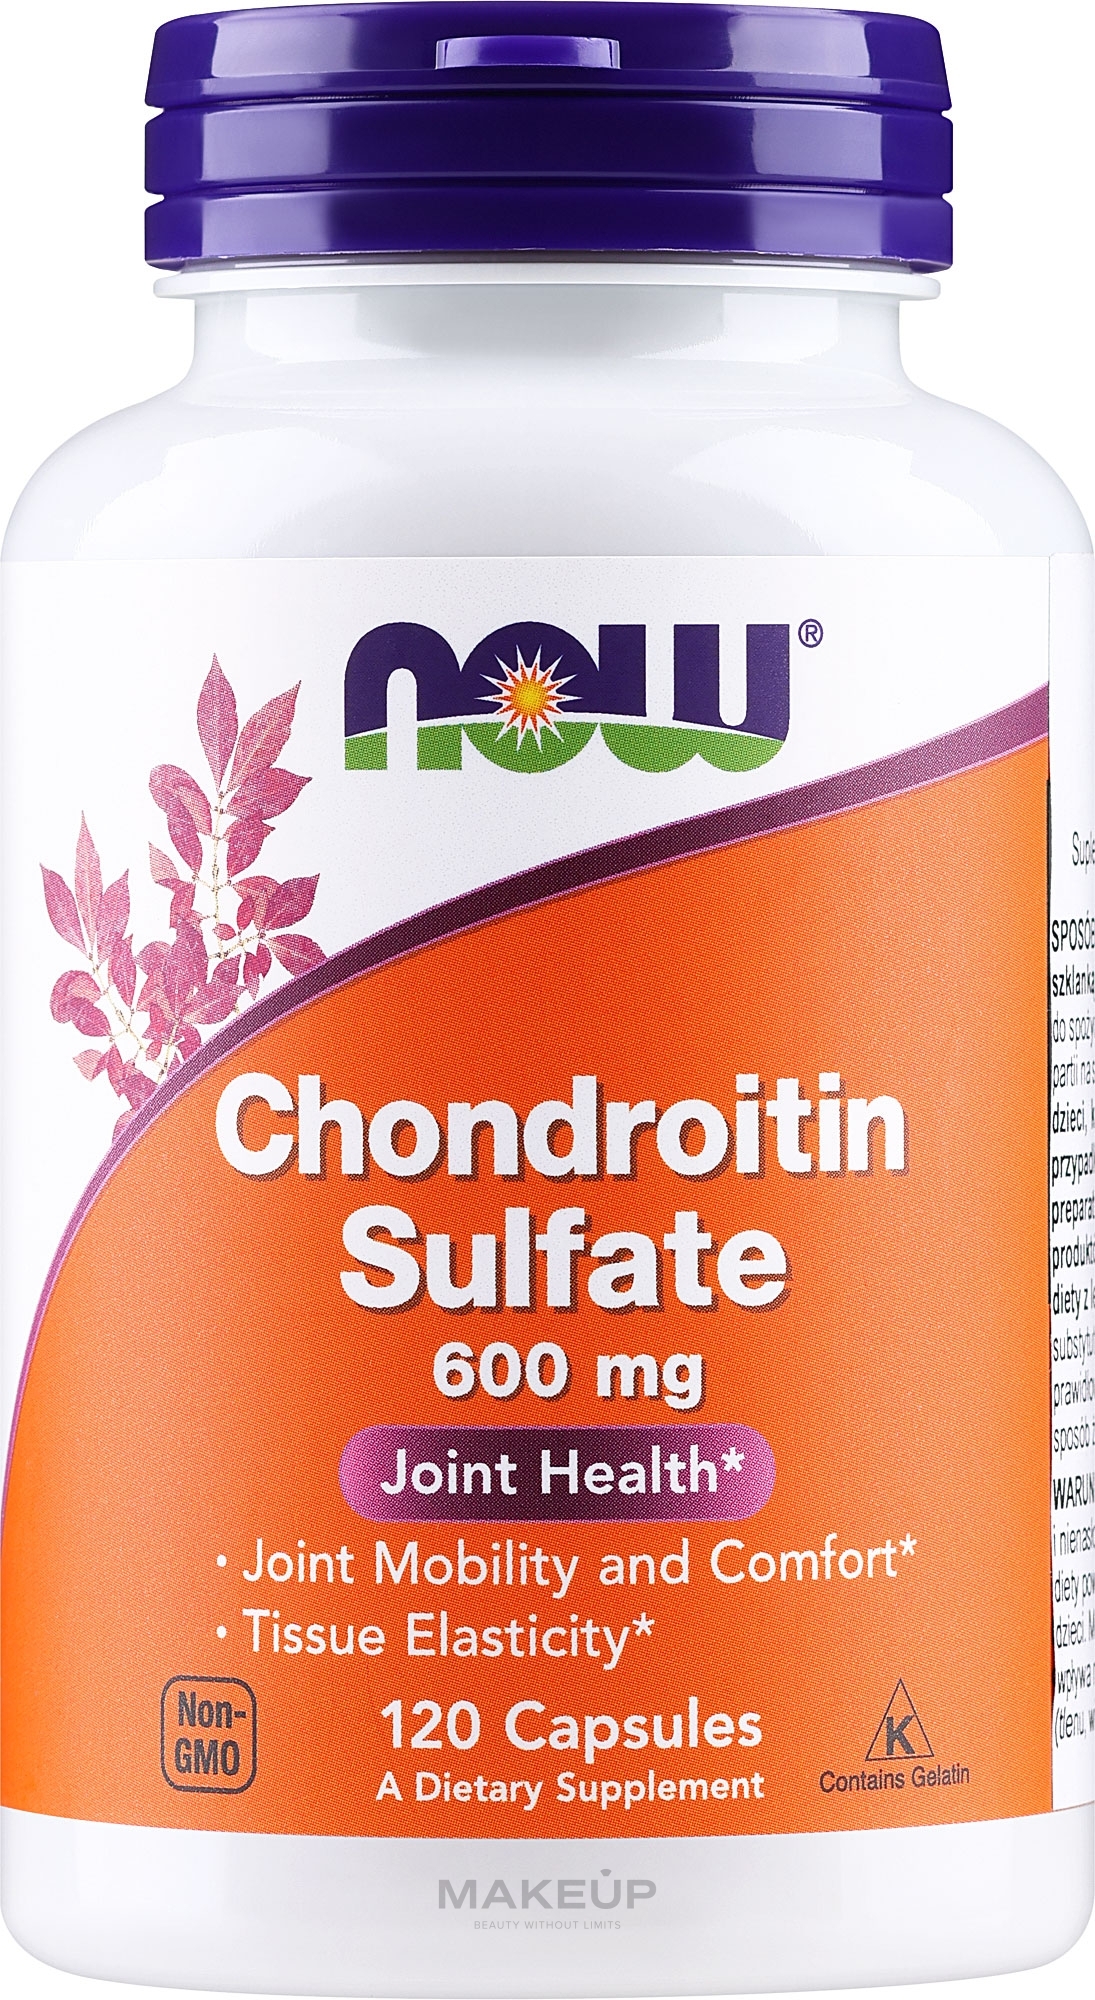 Suplement diety Siarczan chondroityny, 600 mg - Now Foods Chondroitin Sulfate — Zdjęcie 120 szt.